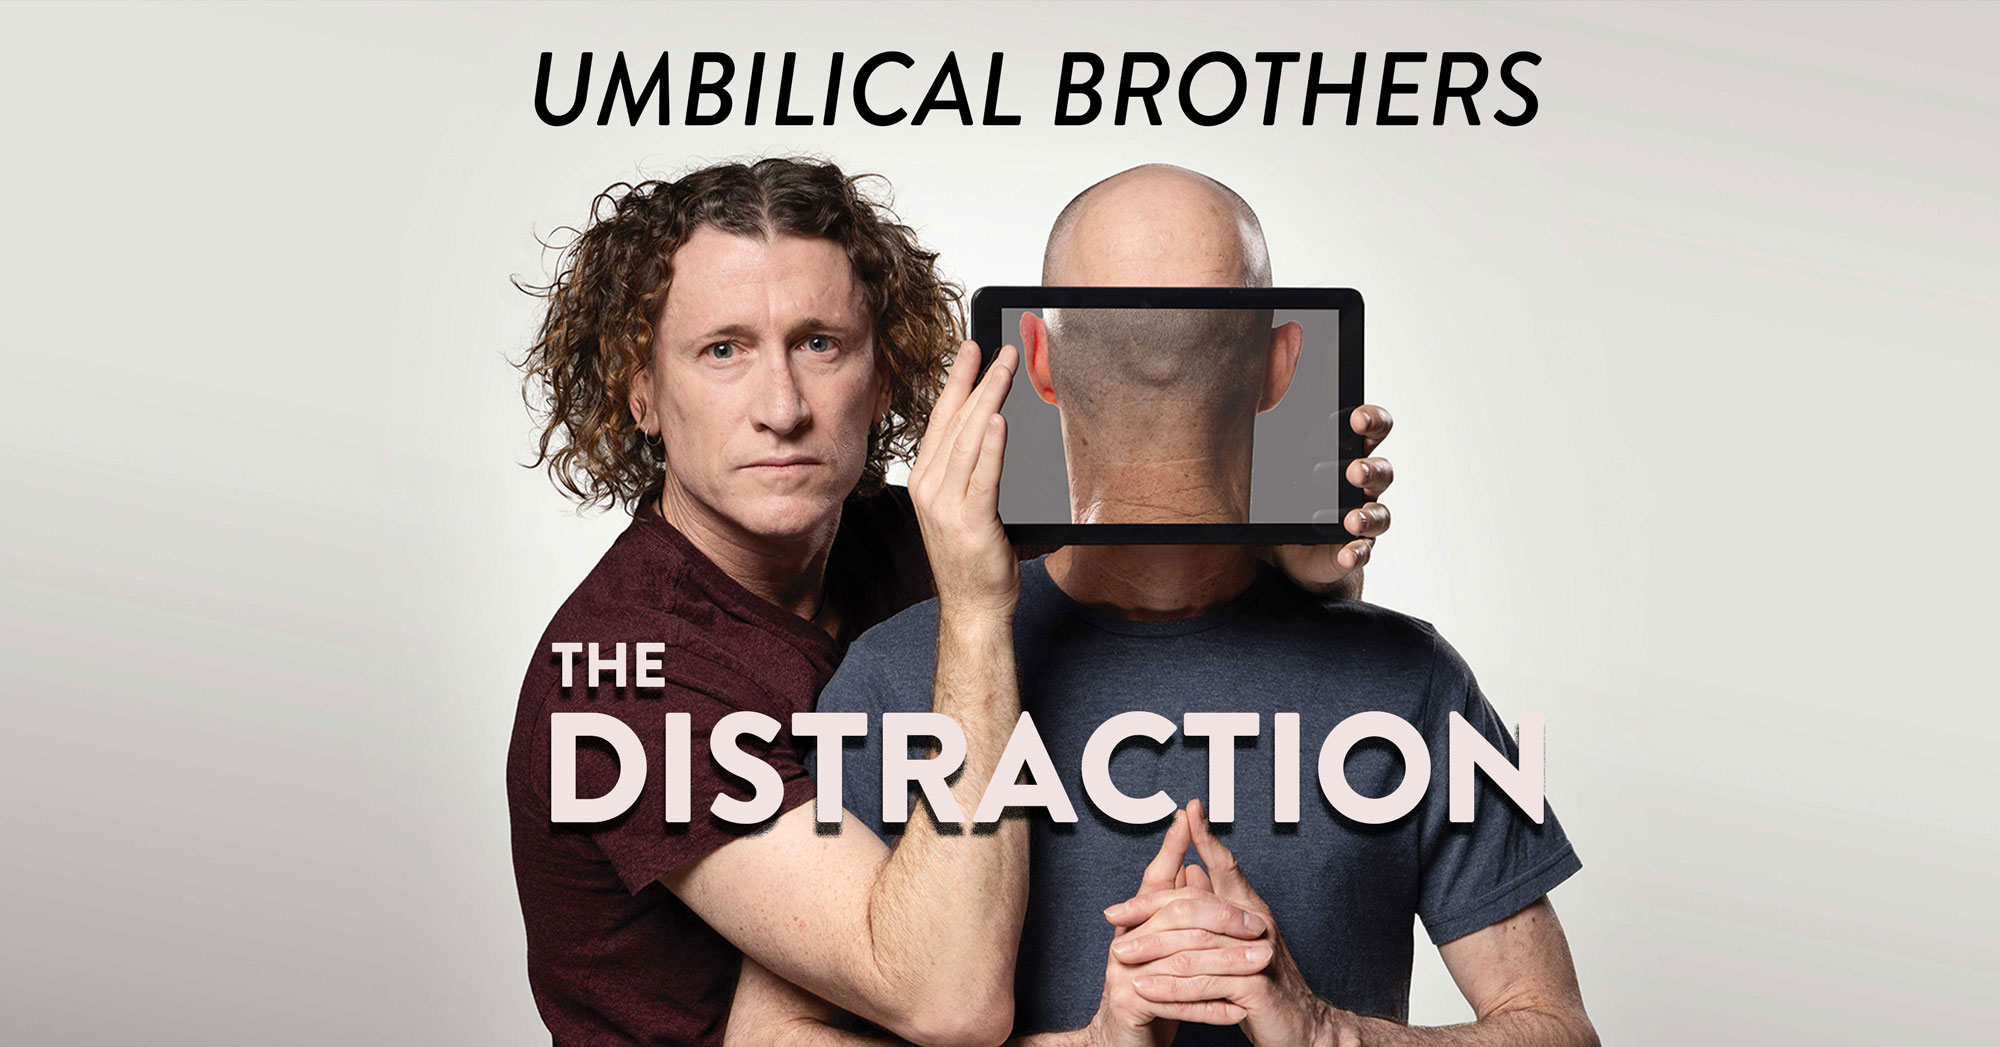 Umbilical Brother the distraction